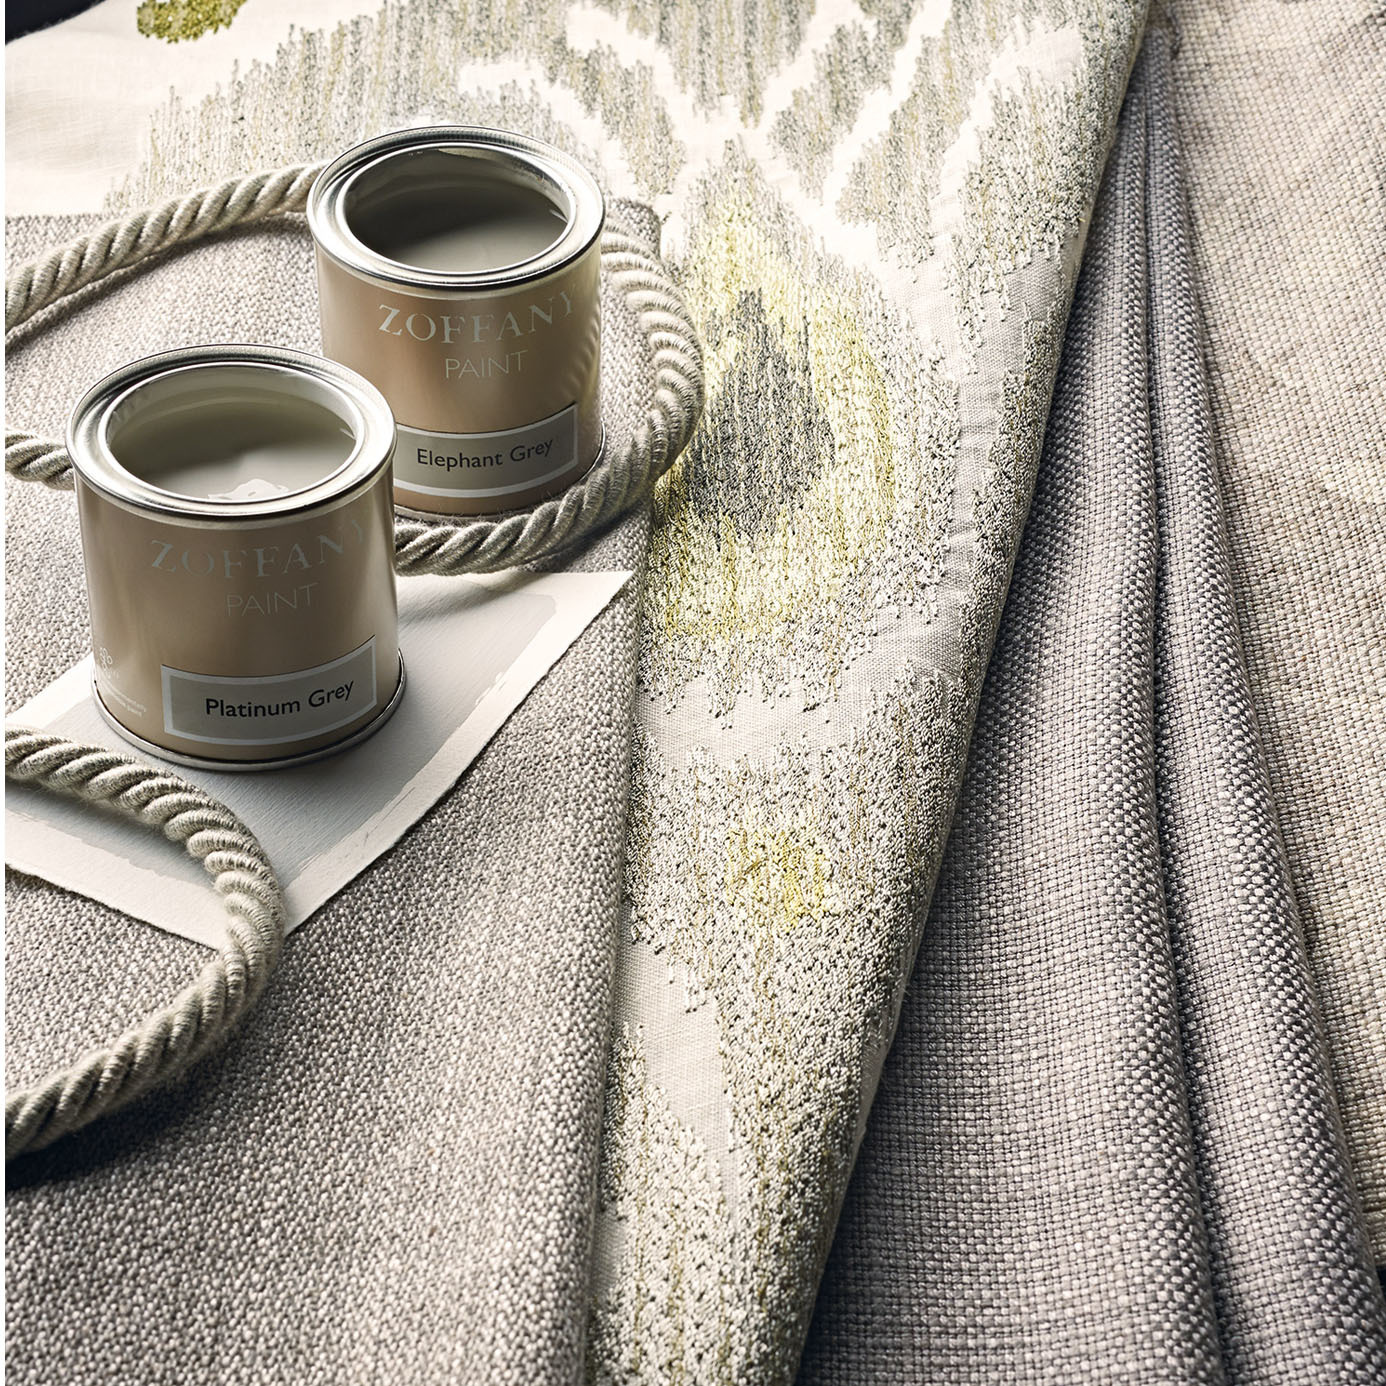 Audley Dove Grey Fabric by ZOF